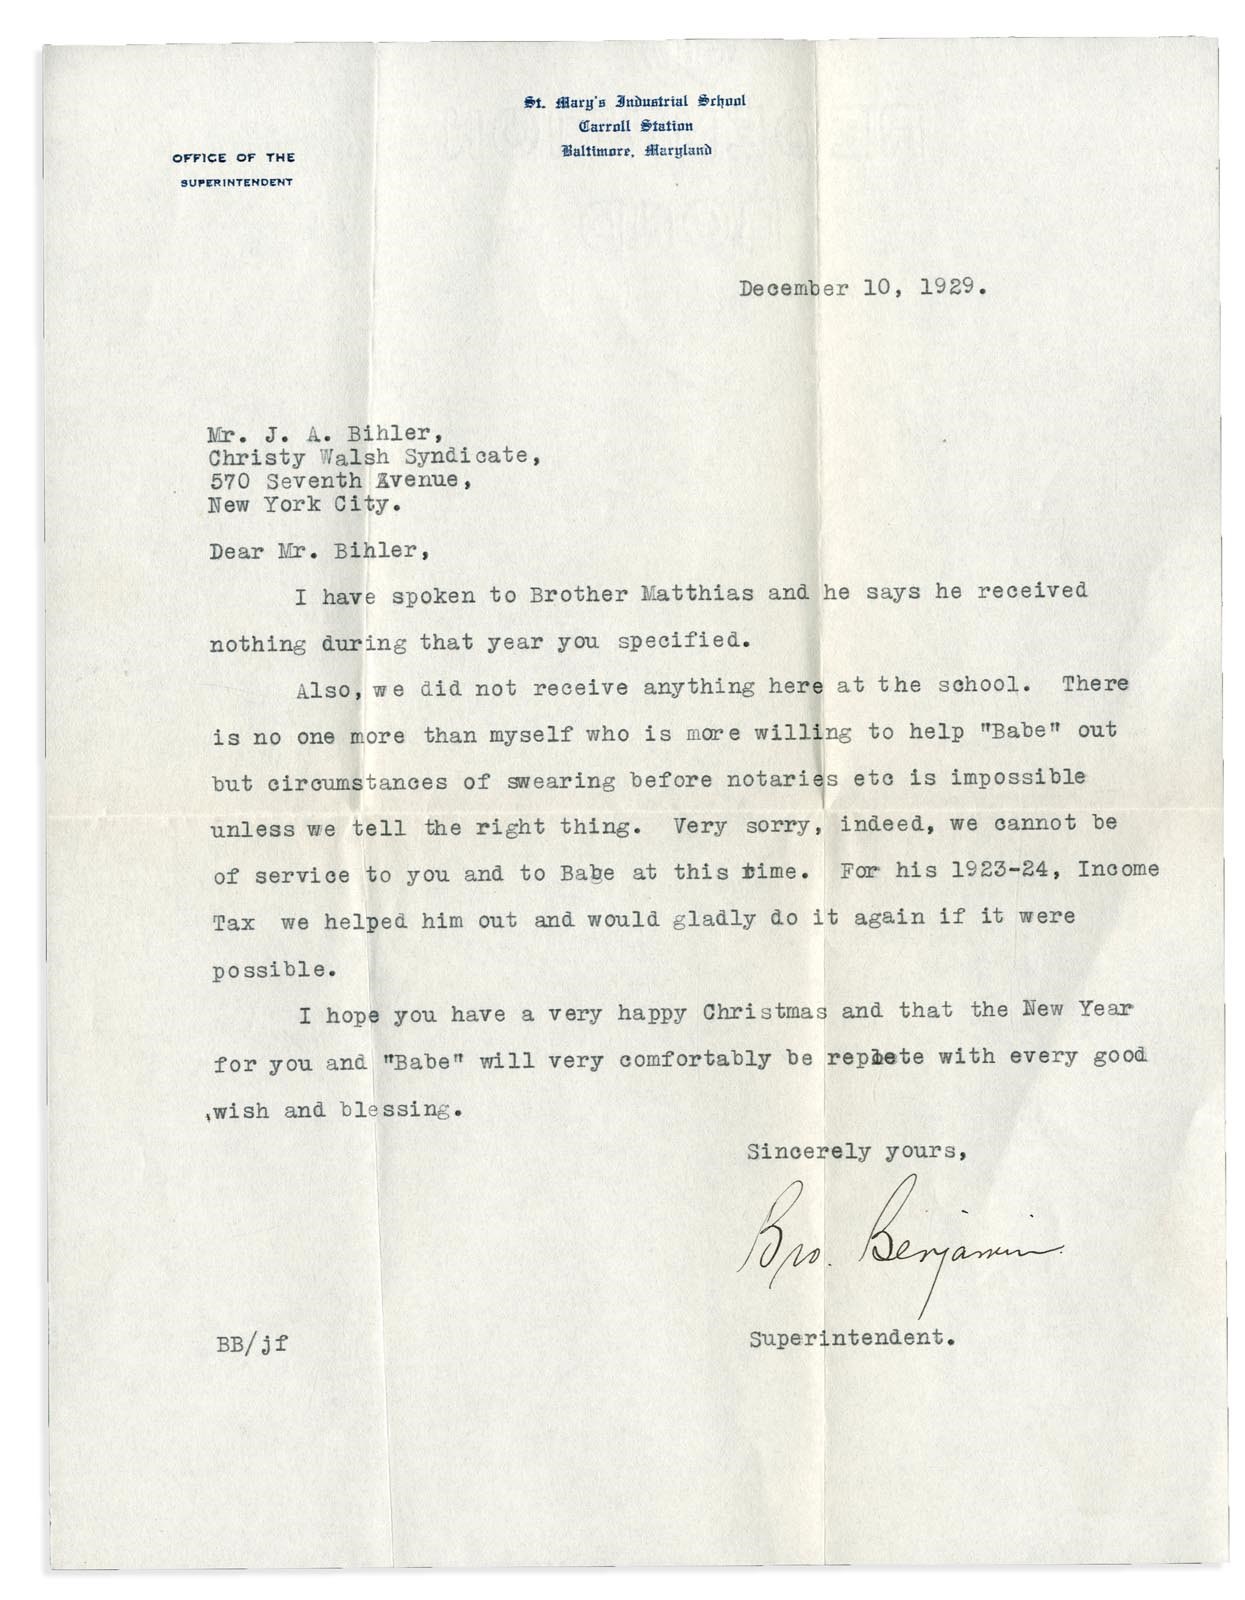 Important 1929 St. Mary's Industrial School Letter r.e. Brother Matthias Won't Lie To Save Babe Ruth From Tax Troubles